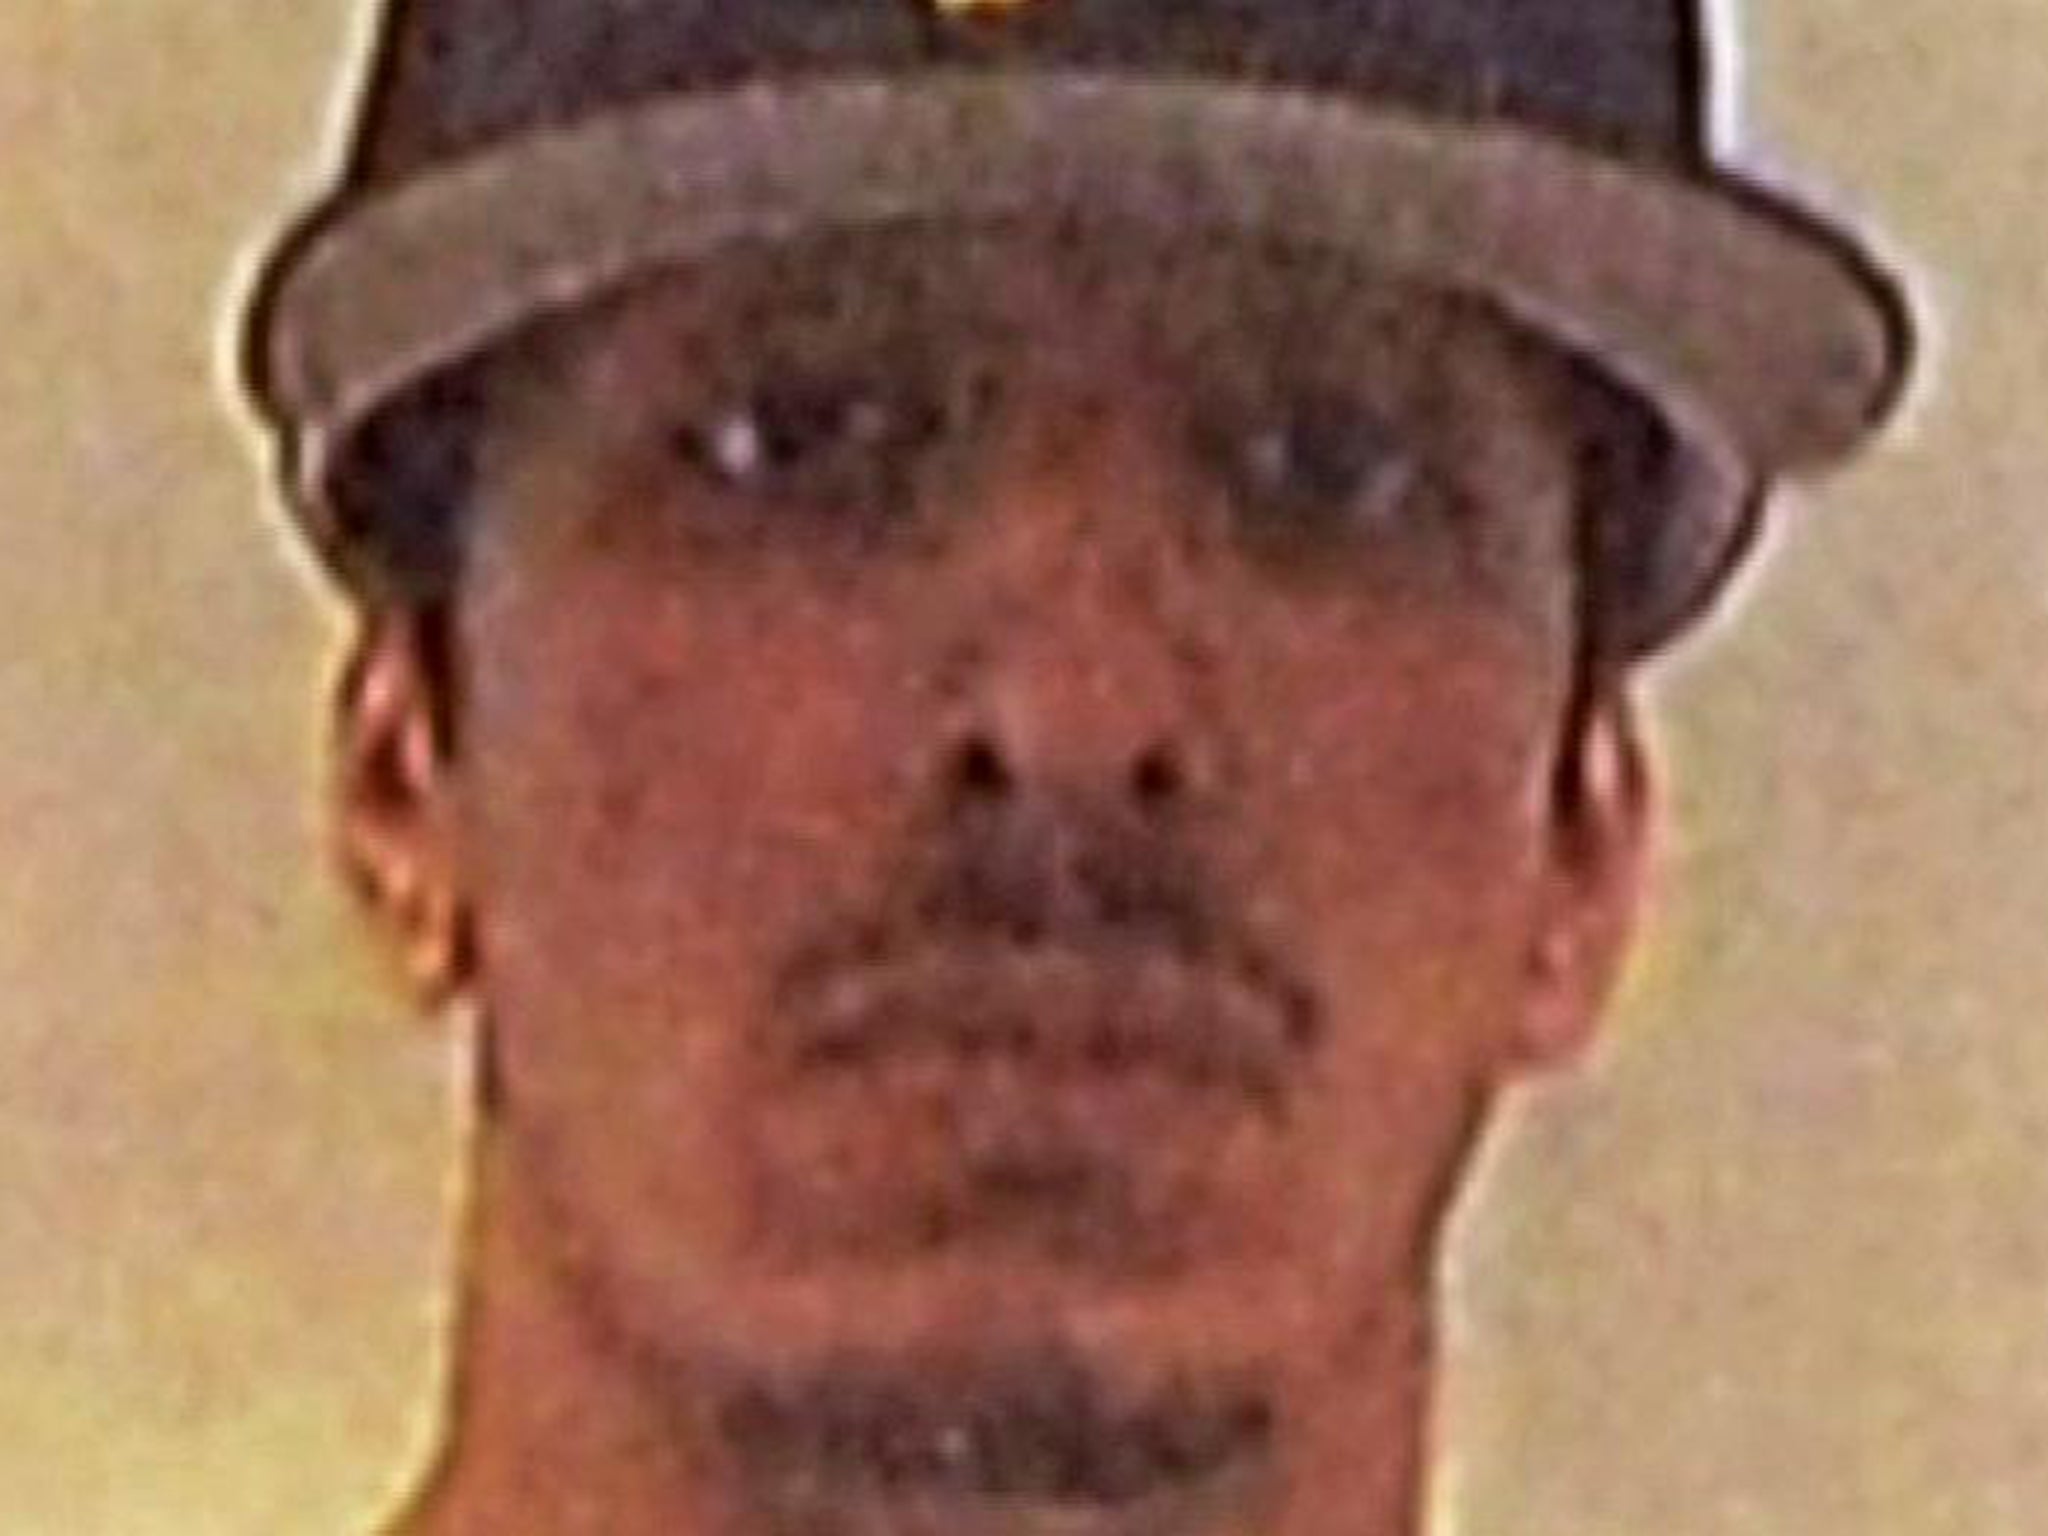 Mohammed Emwazi, also known as 'Jihadi John', during his time at Westminster University